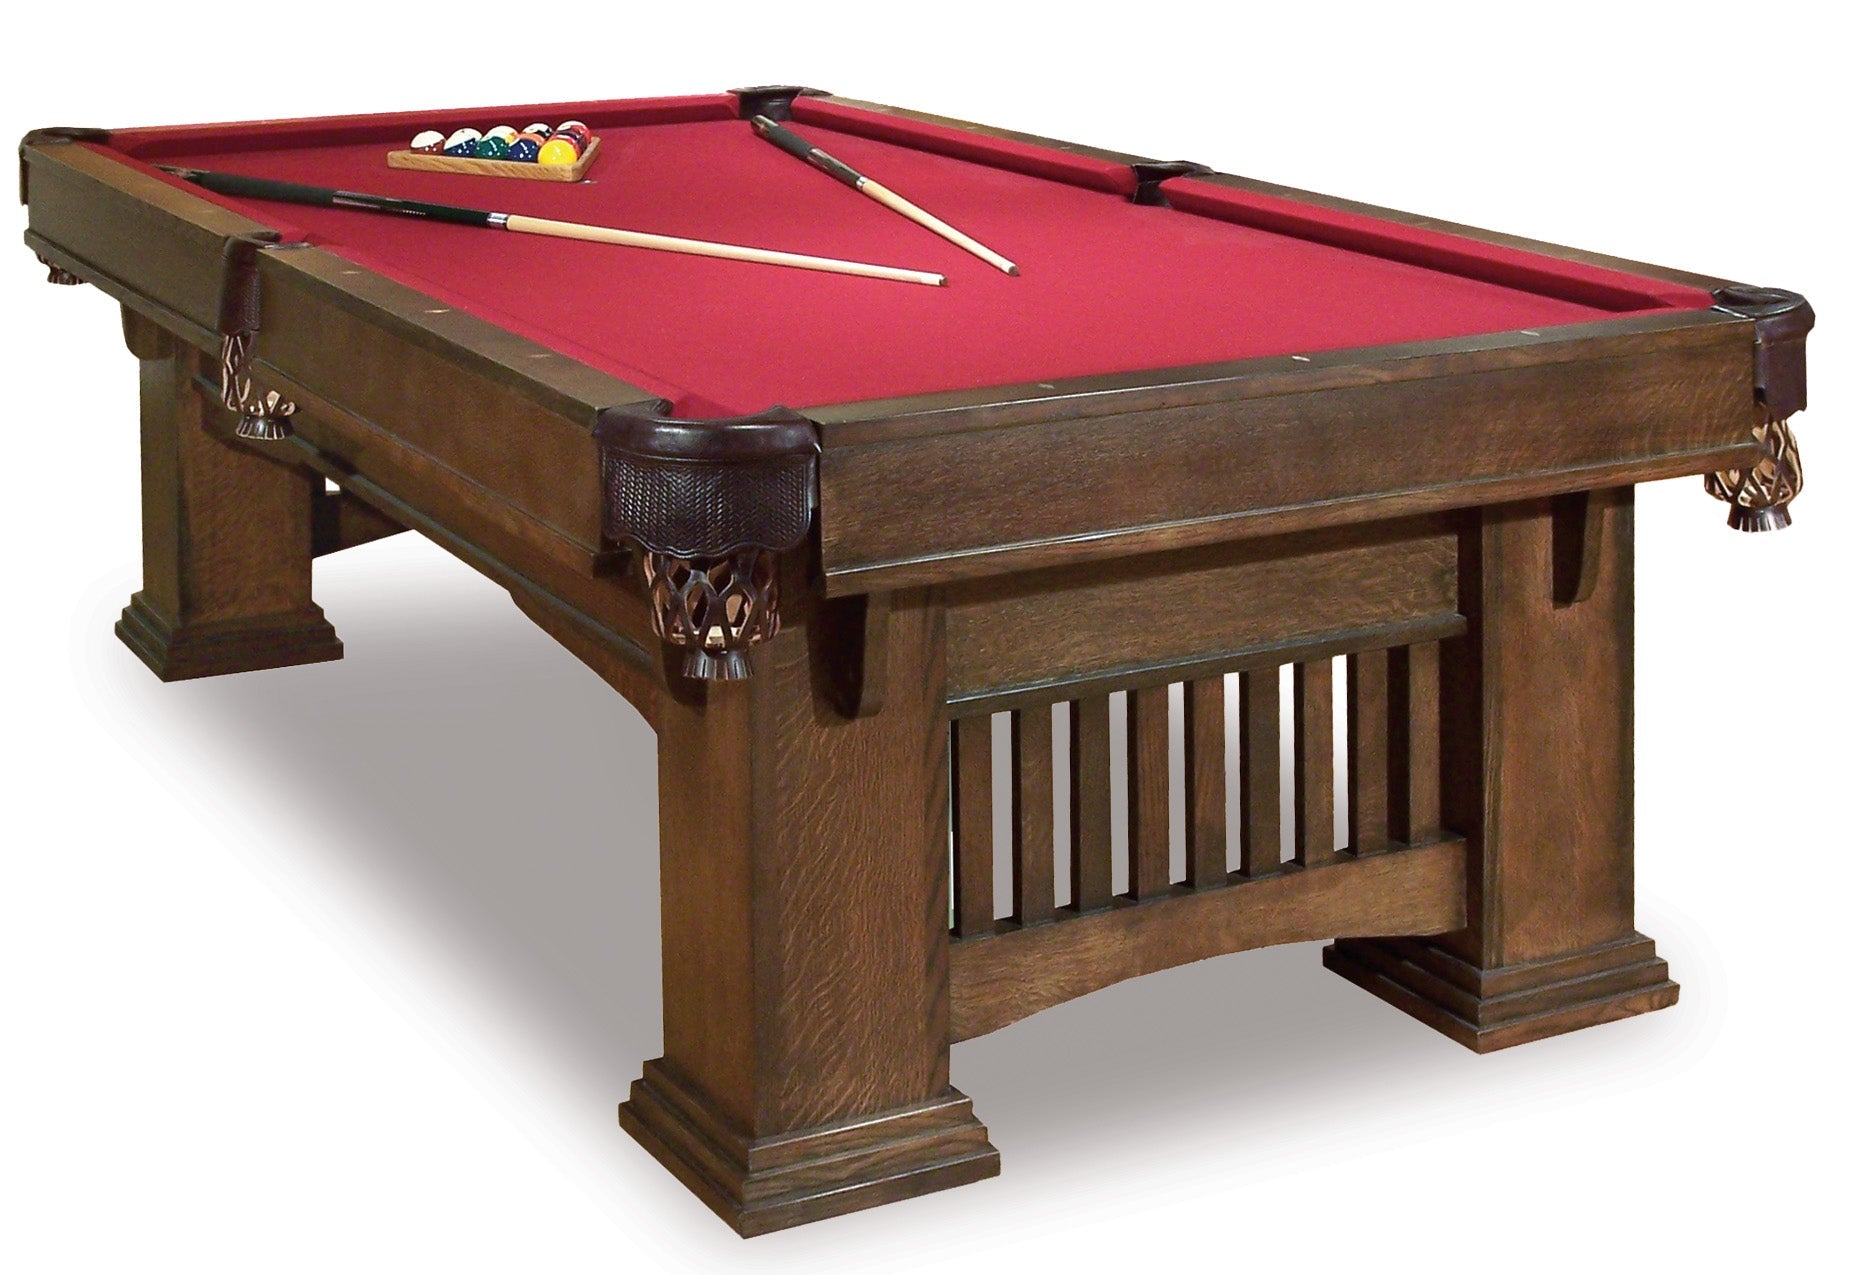 7' Hand-crafted Classic Mission Pool Table (Red Oak)